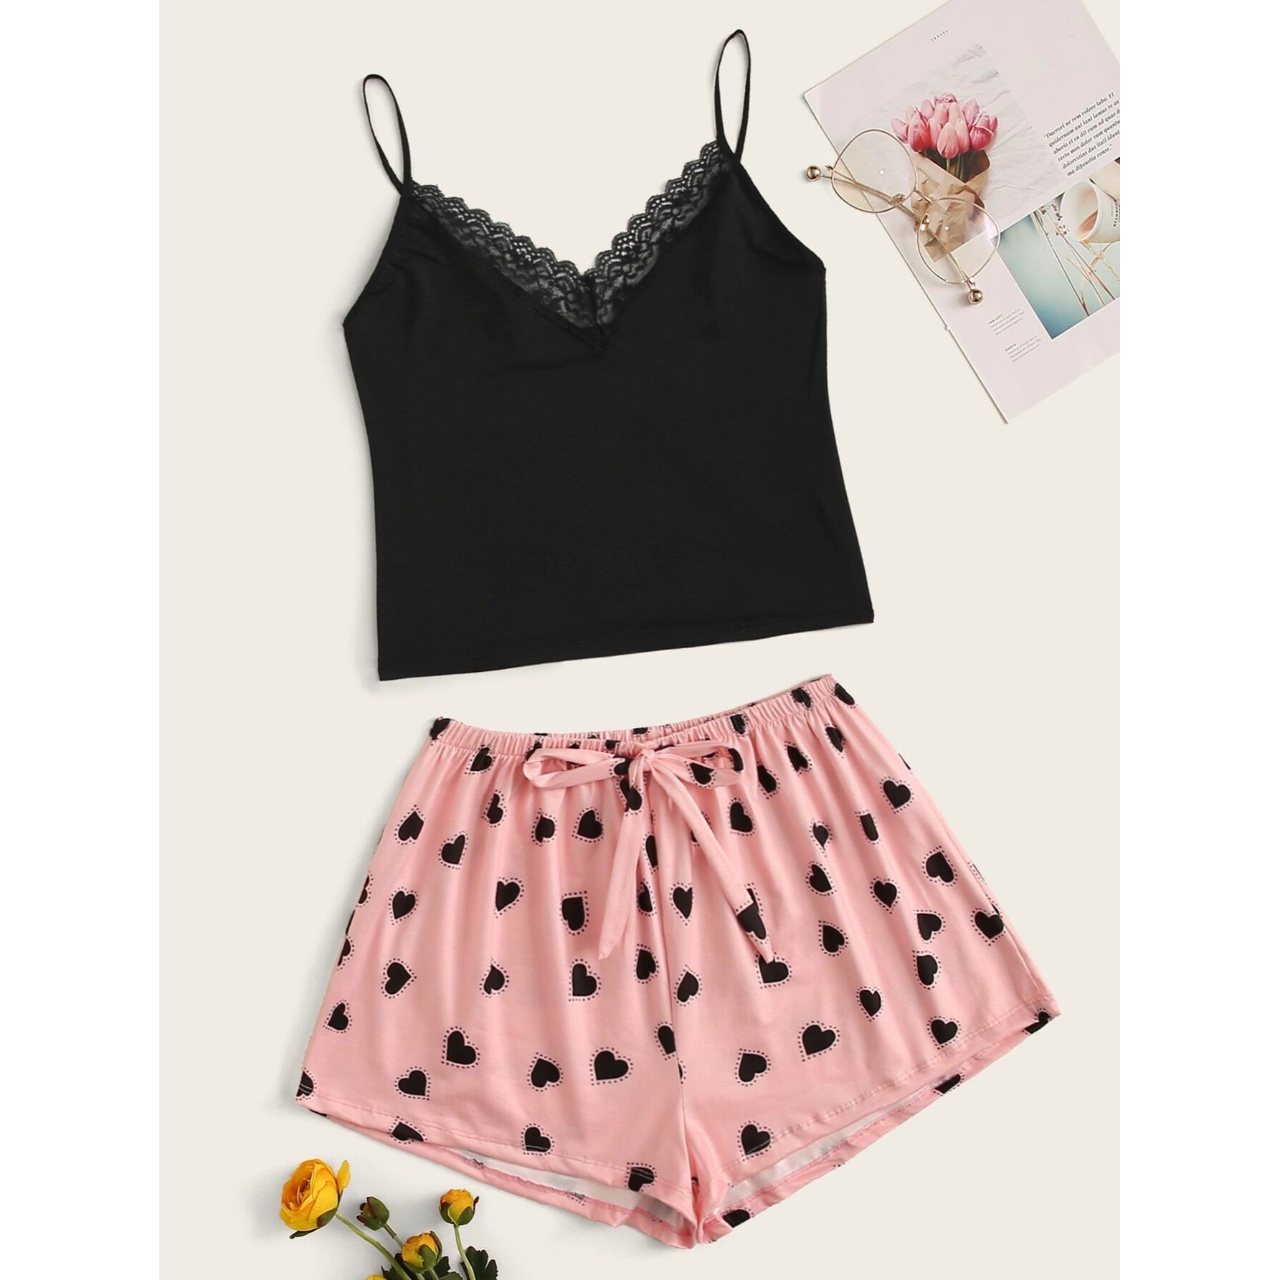 Lace trim cami top with heart shorts pj set s